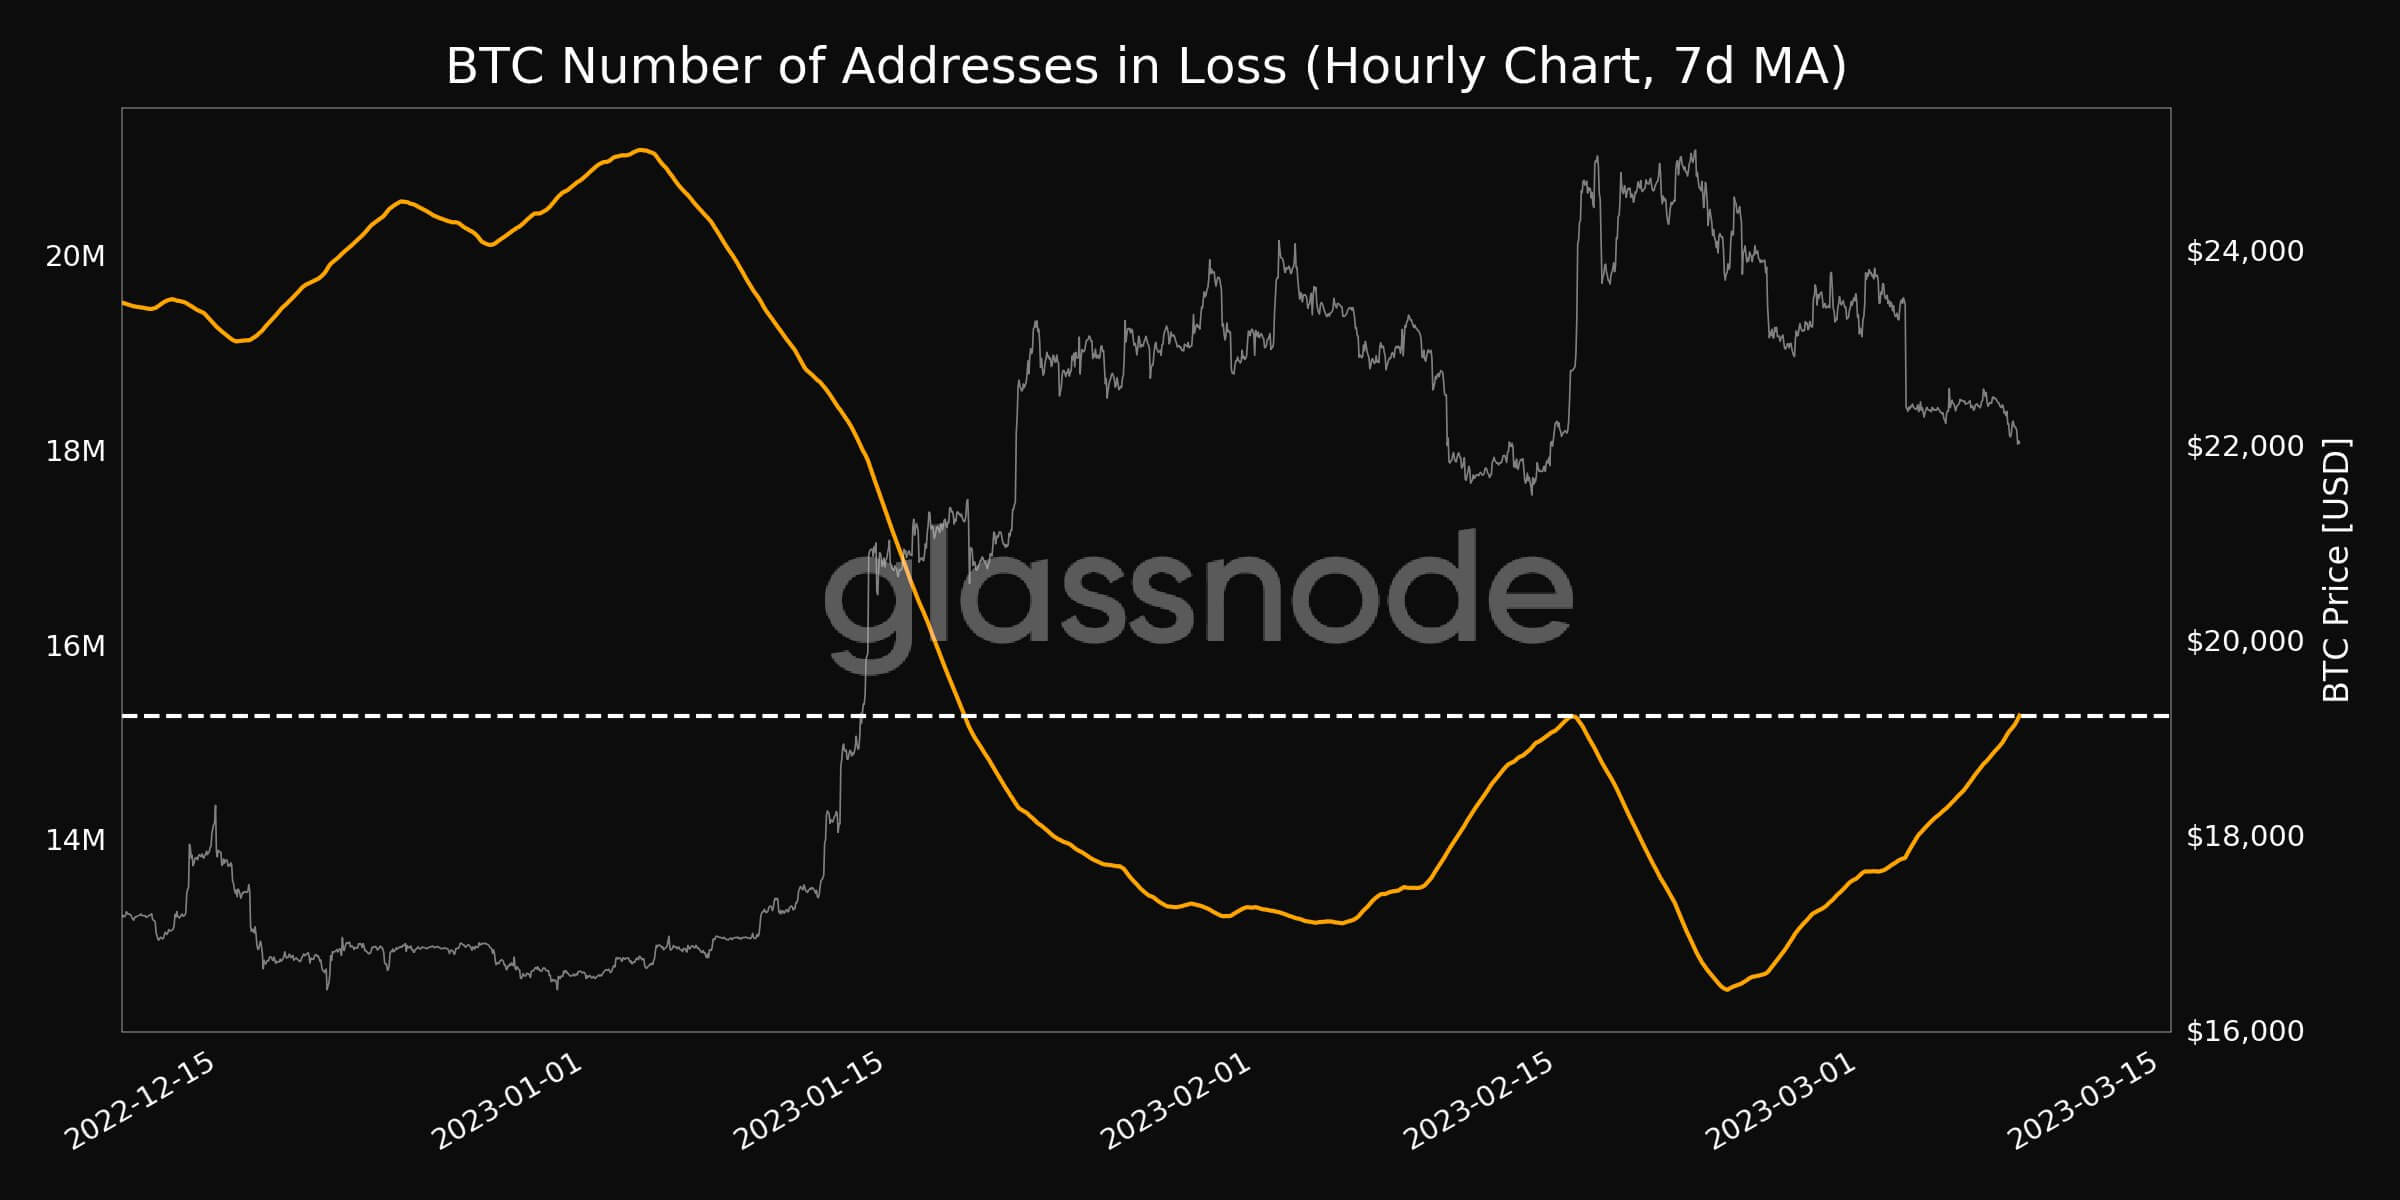 BTC number of addresses in loss